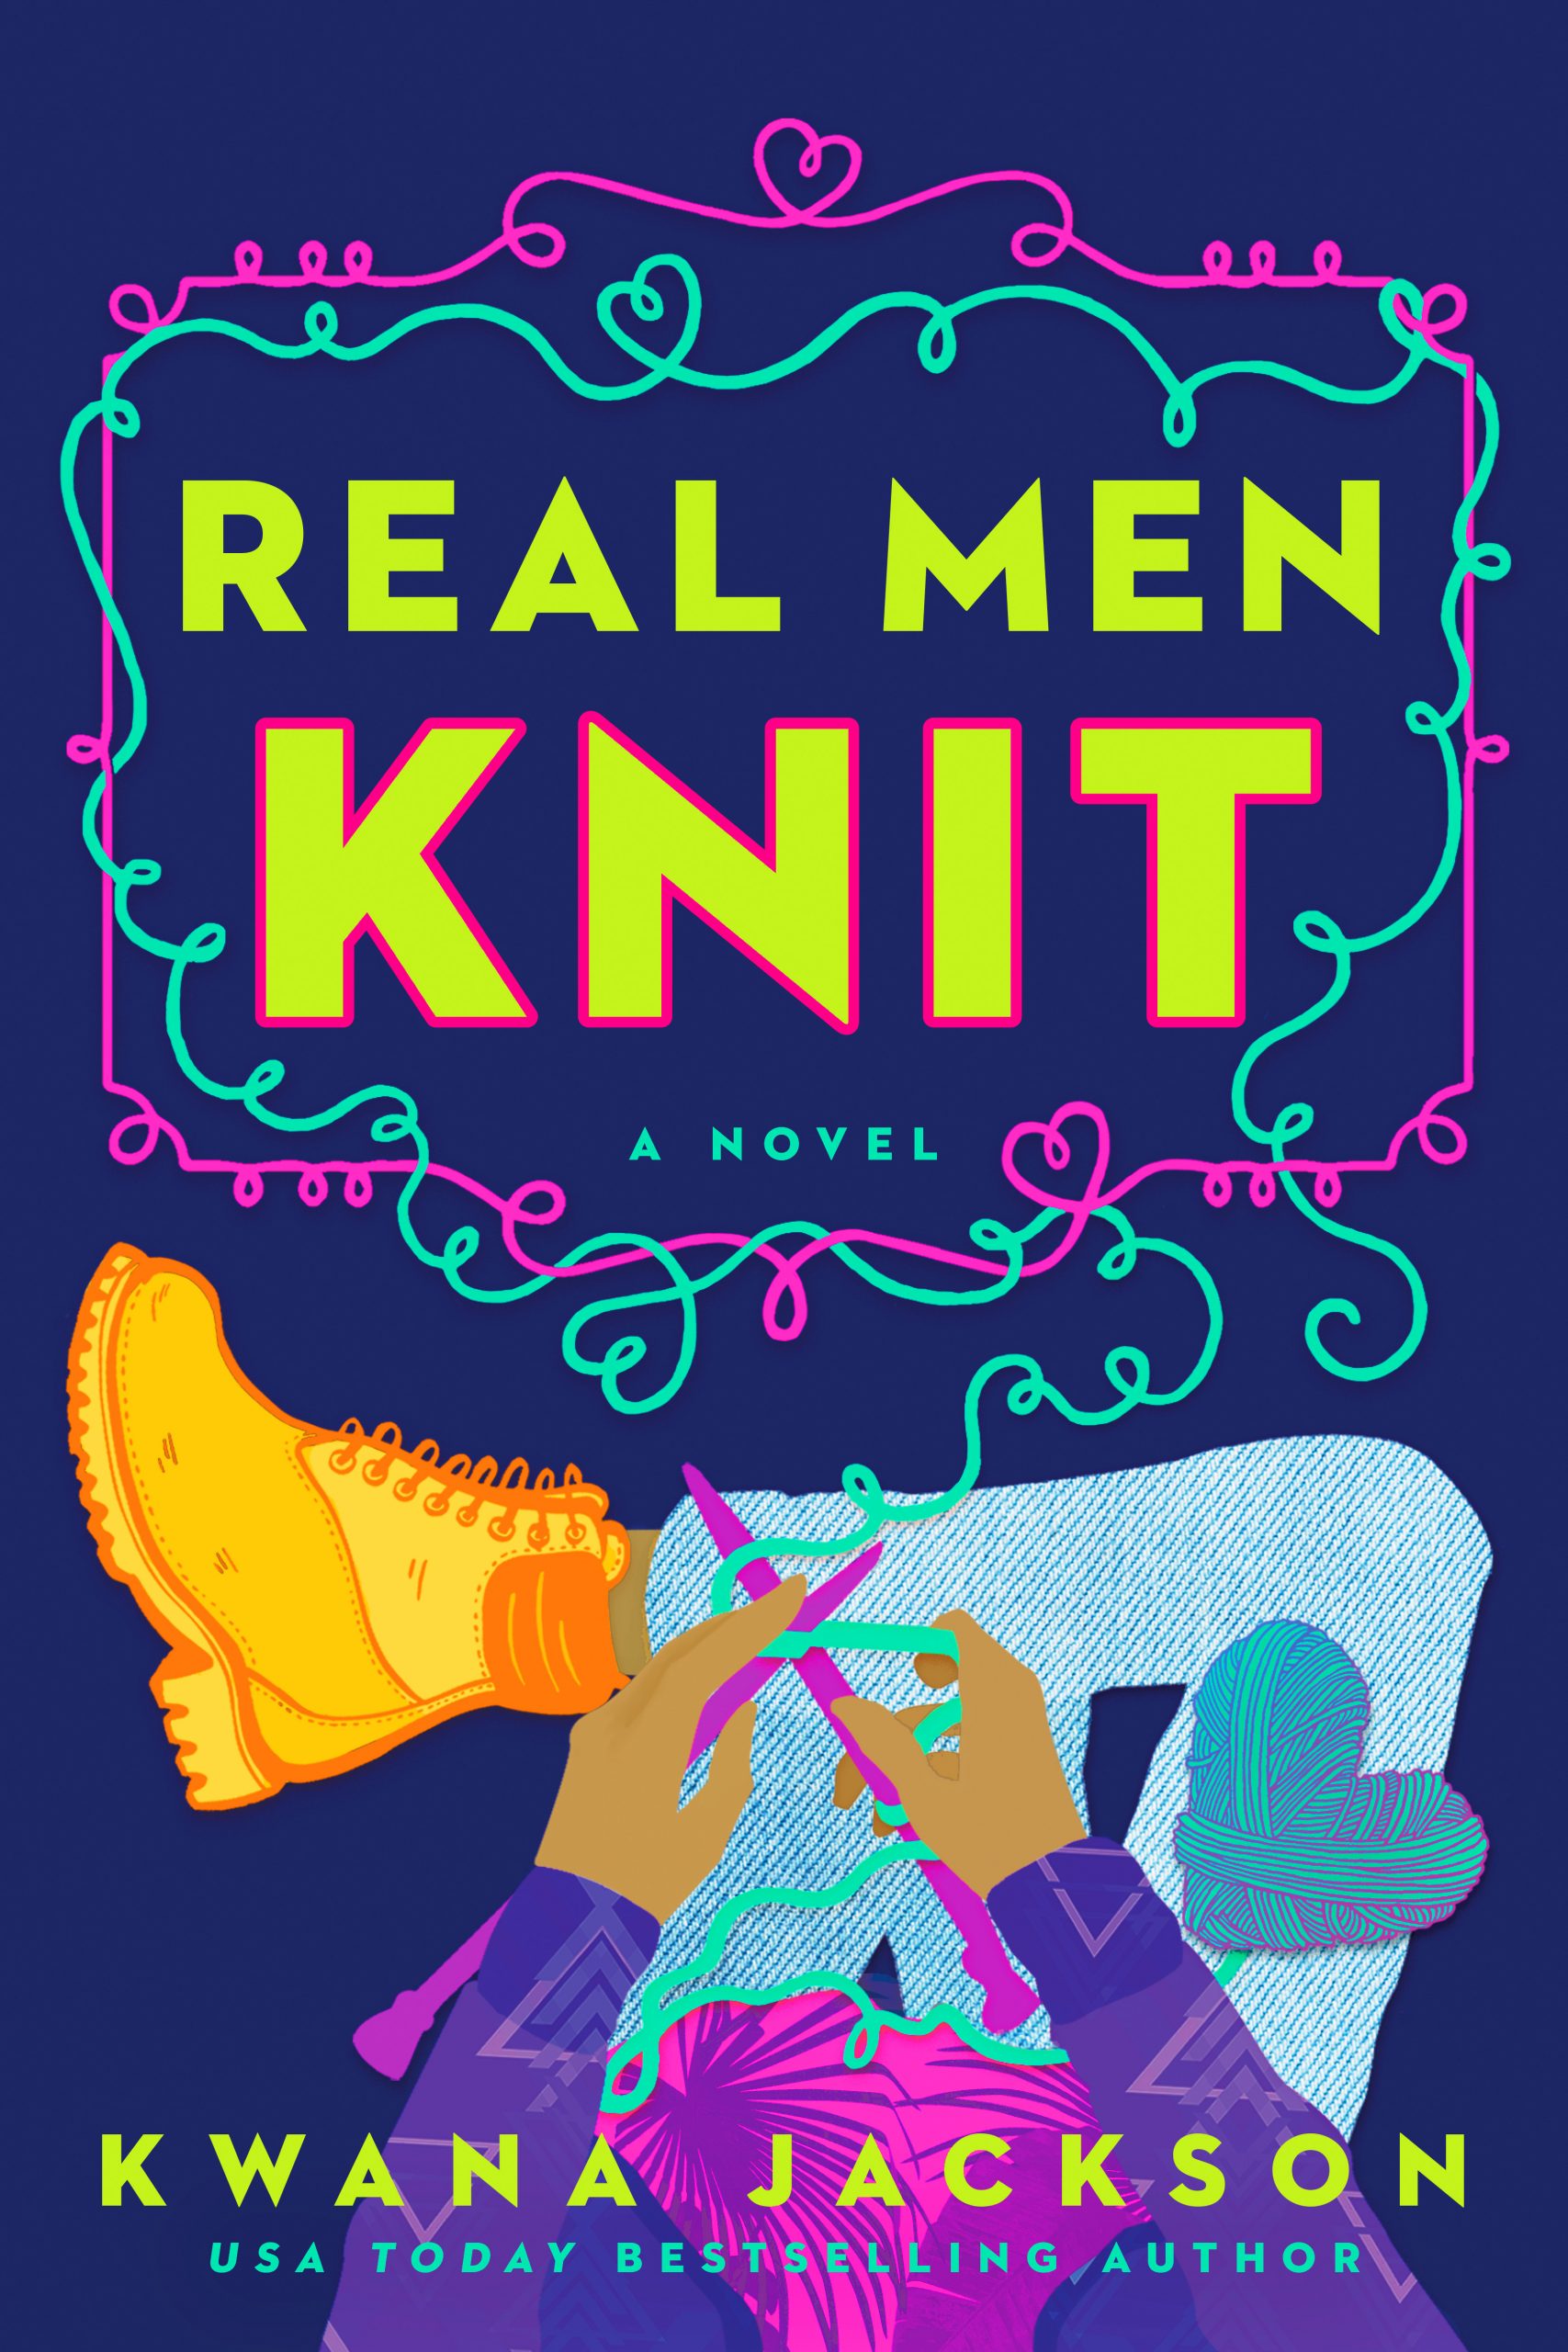 When Does Real Men Knit By Kwana Jackson Come Out? 2020 Contemporary Romance Releases